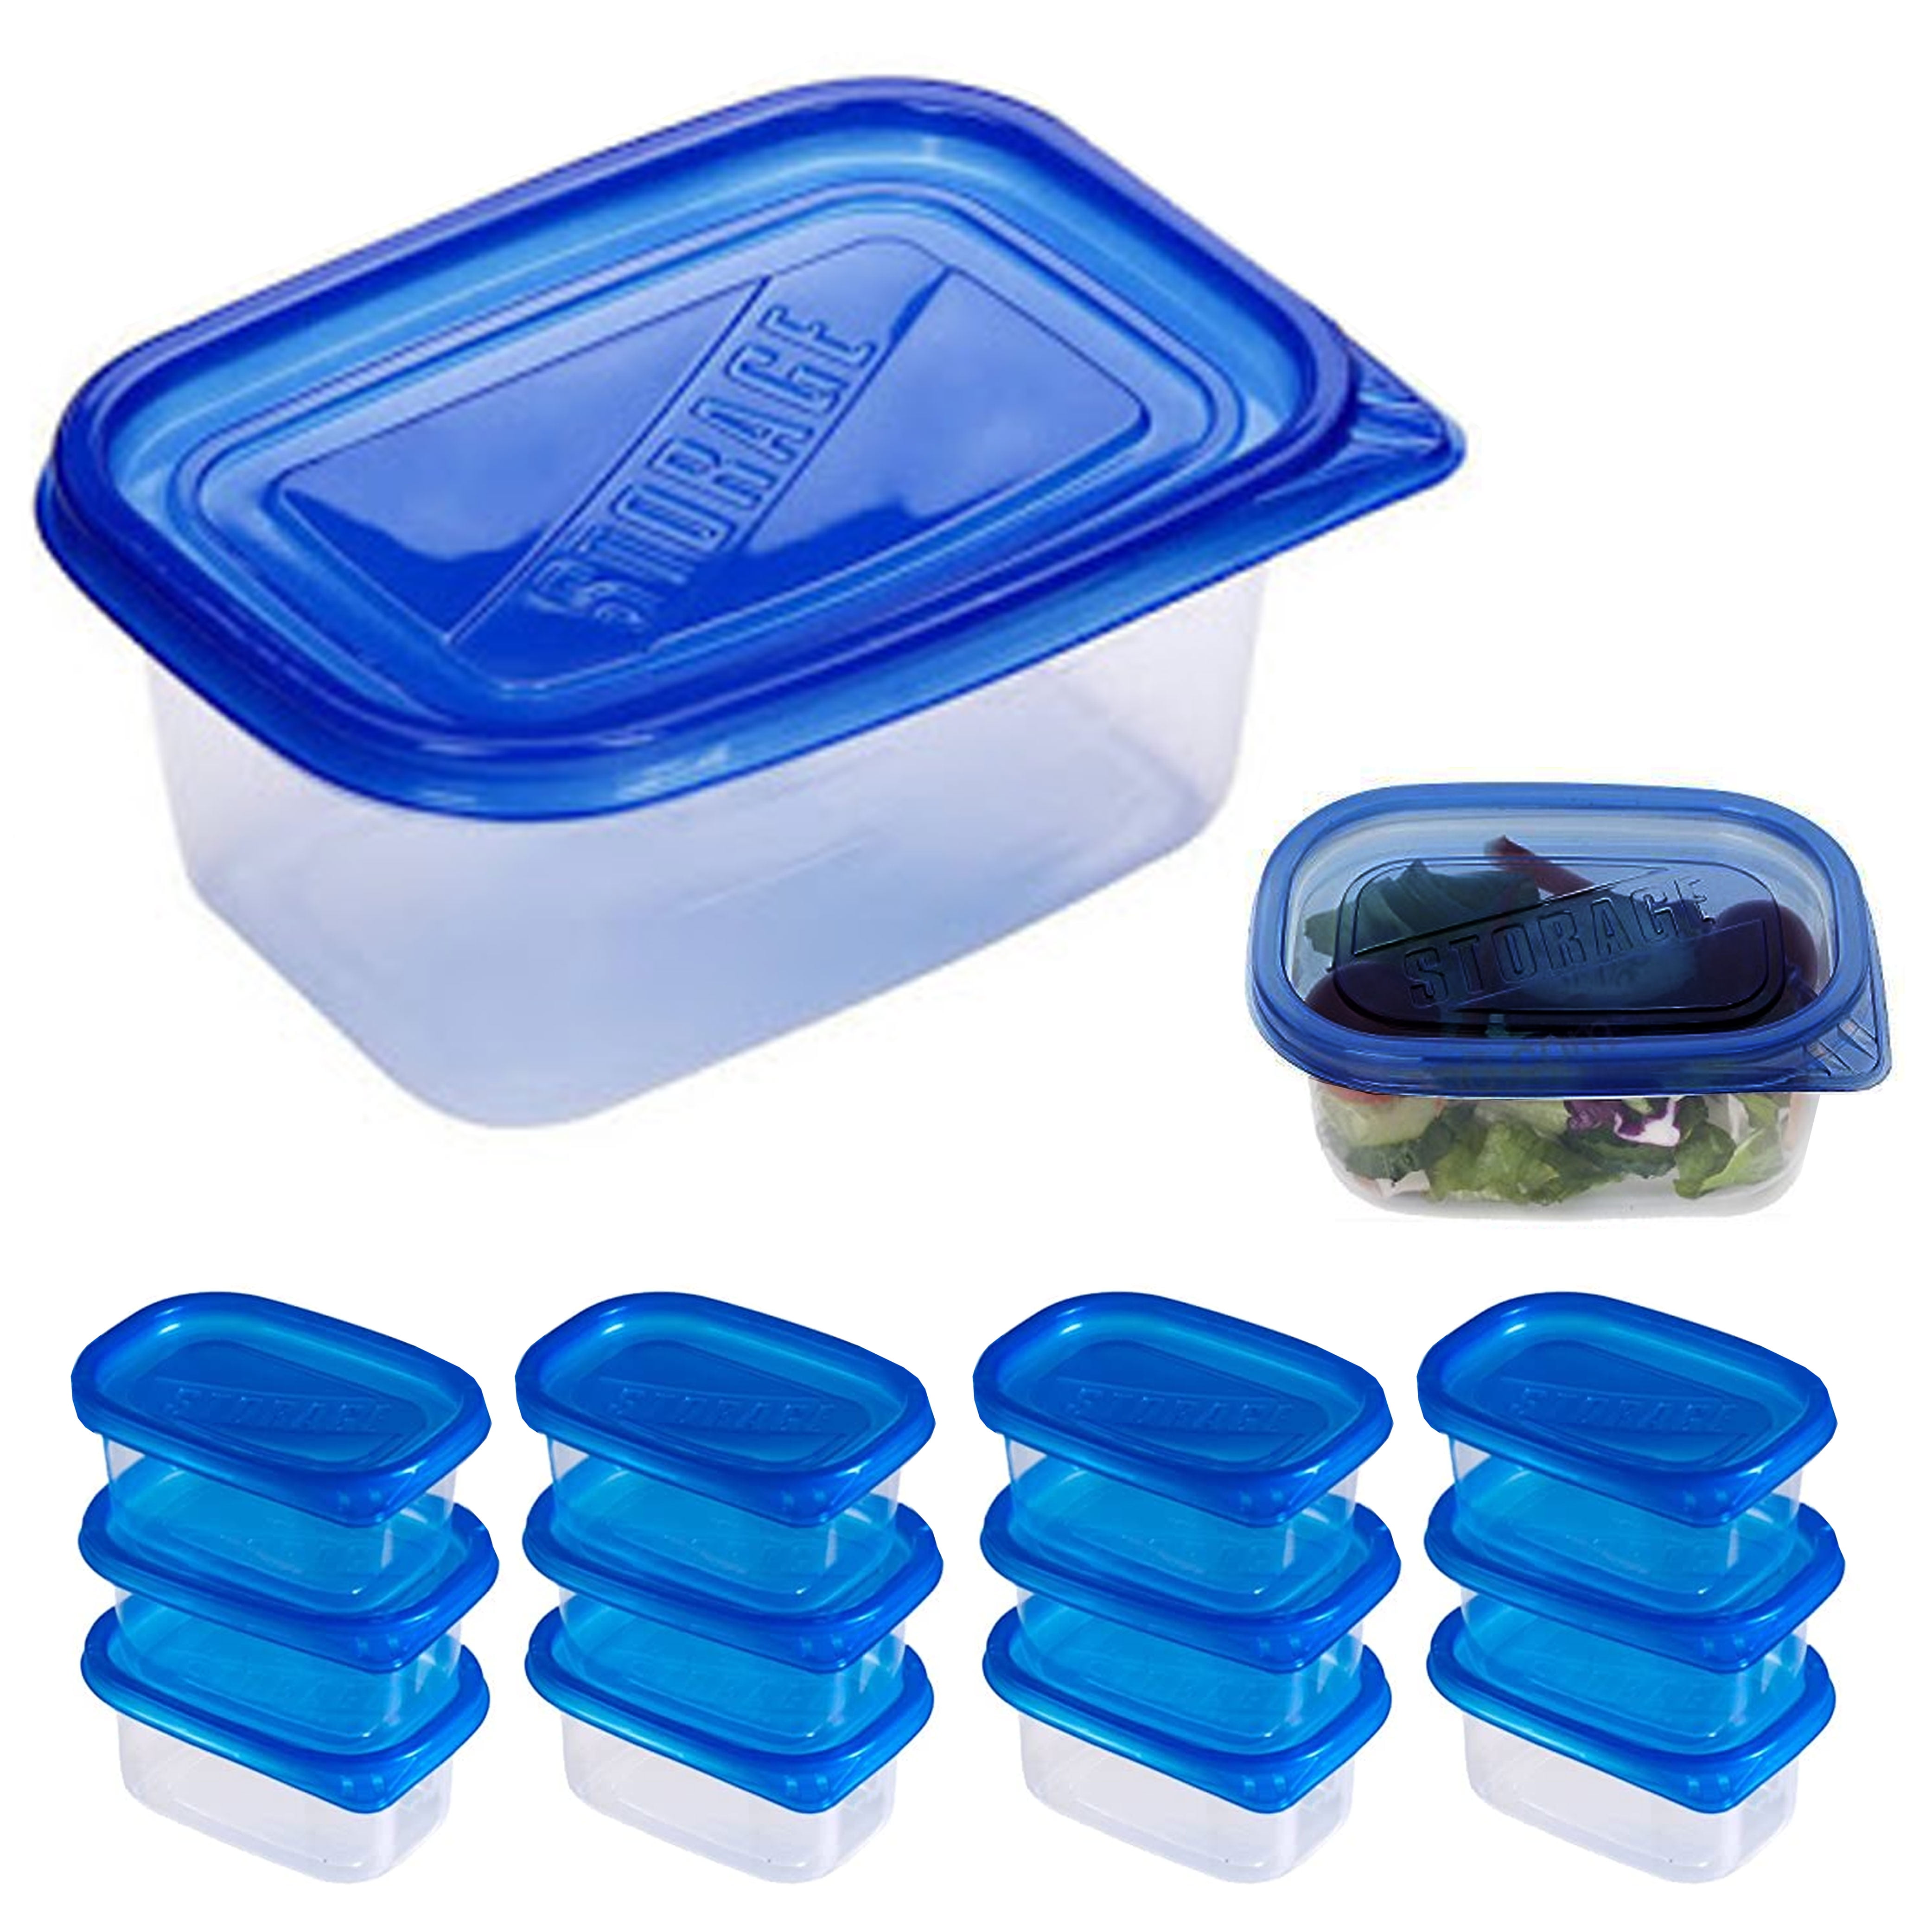 CtC 12 oz Food Storage Organization Sets with Lids 100 Pack, Freezer Safe Meal Prep Container and Food Tray, Dishwasher Microwave Safe Plates, Heavy